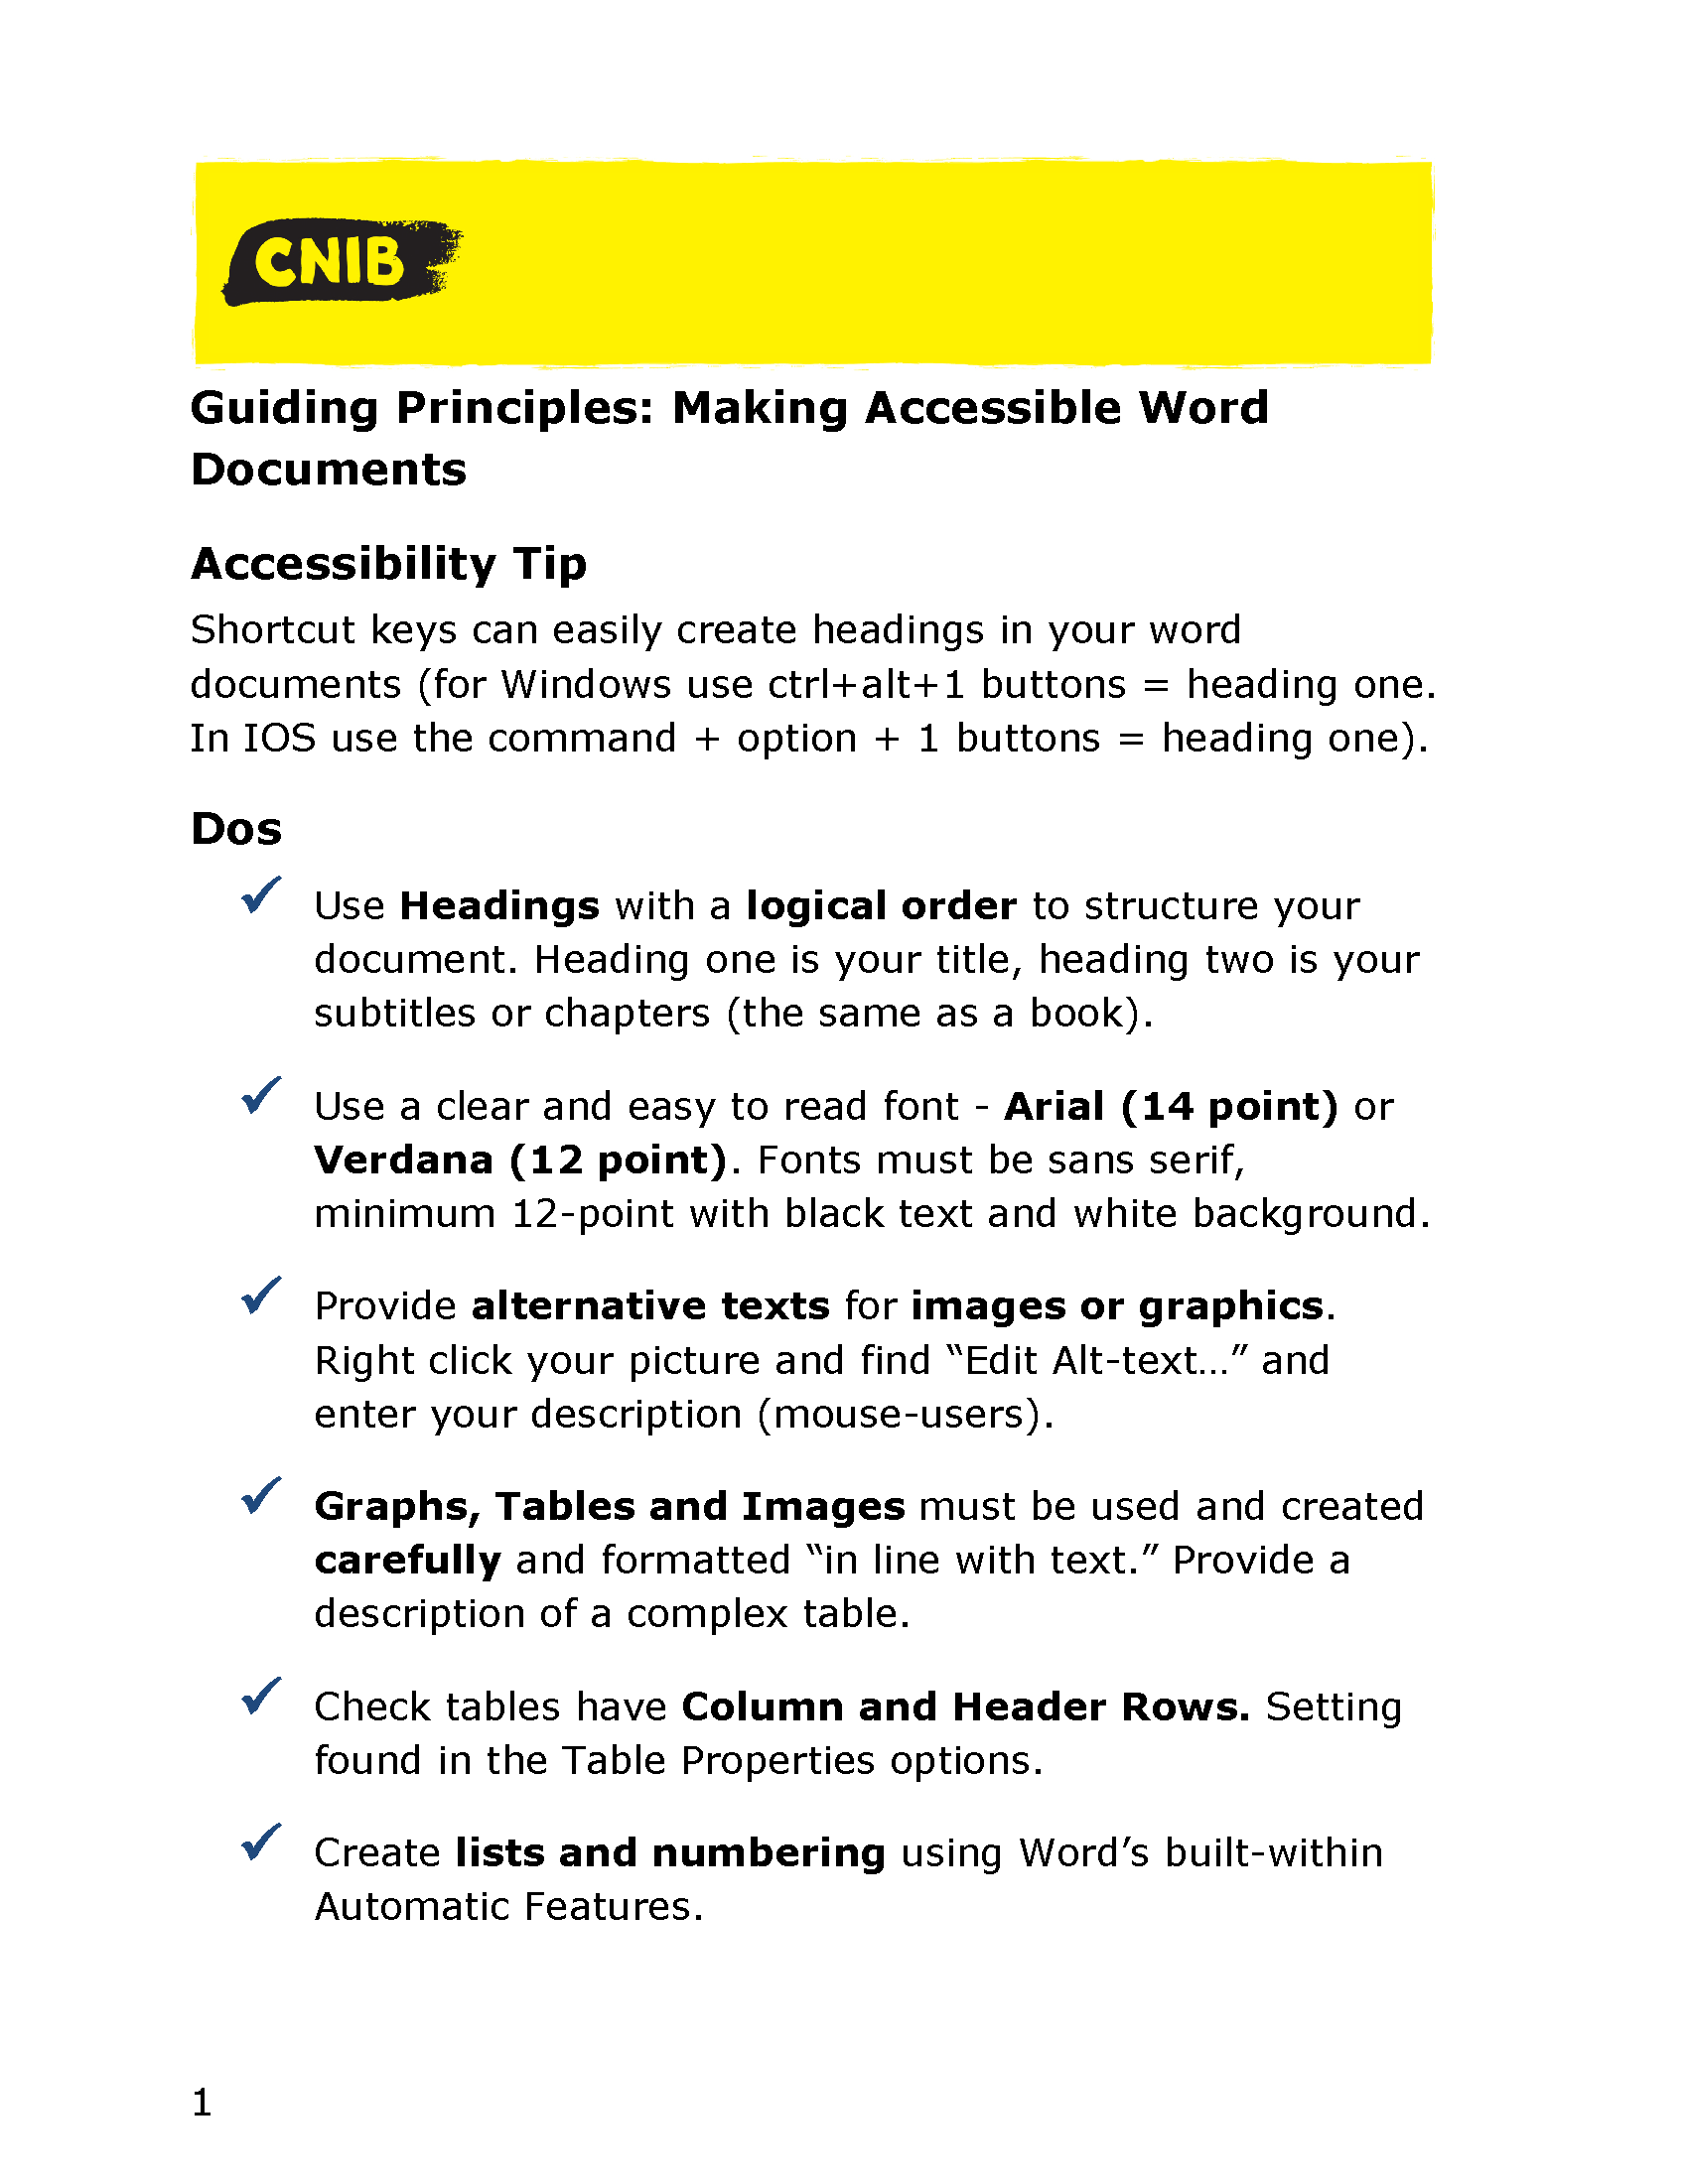 CNIB Guiding Principles:  Making Accessible Word Documents